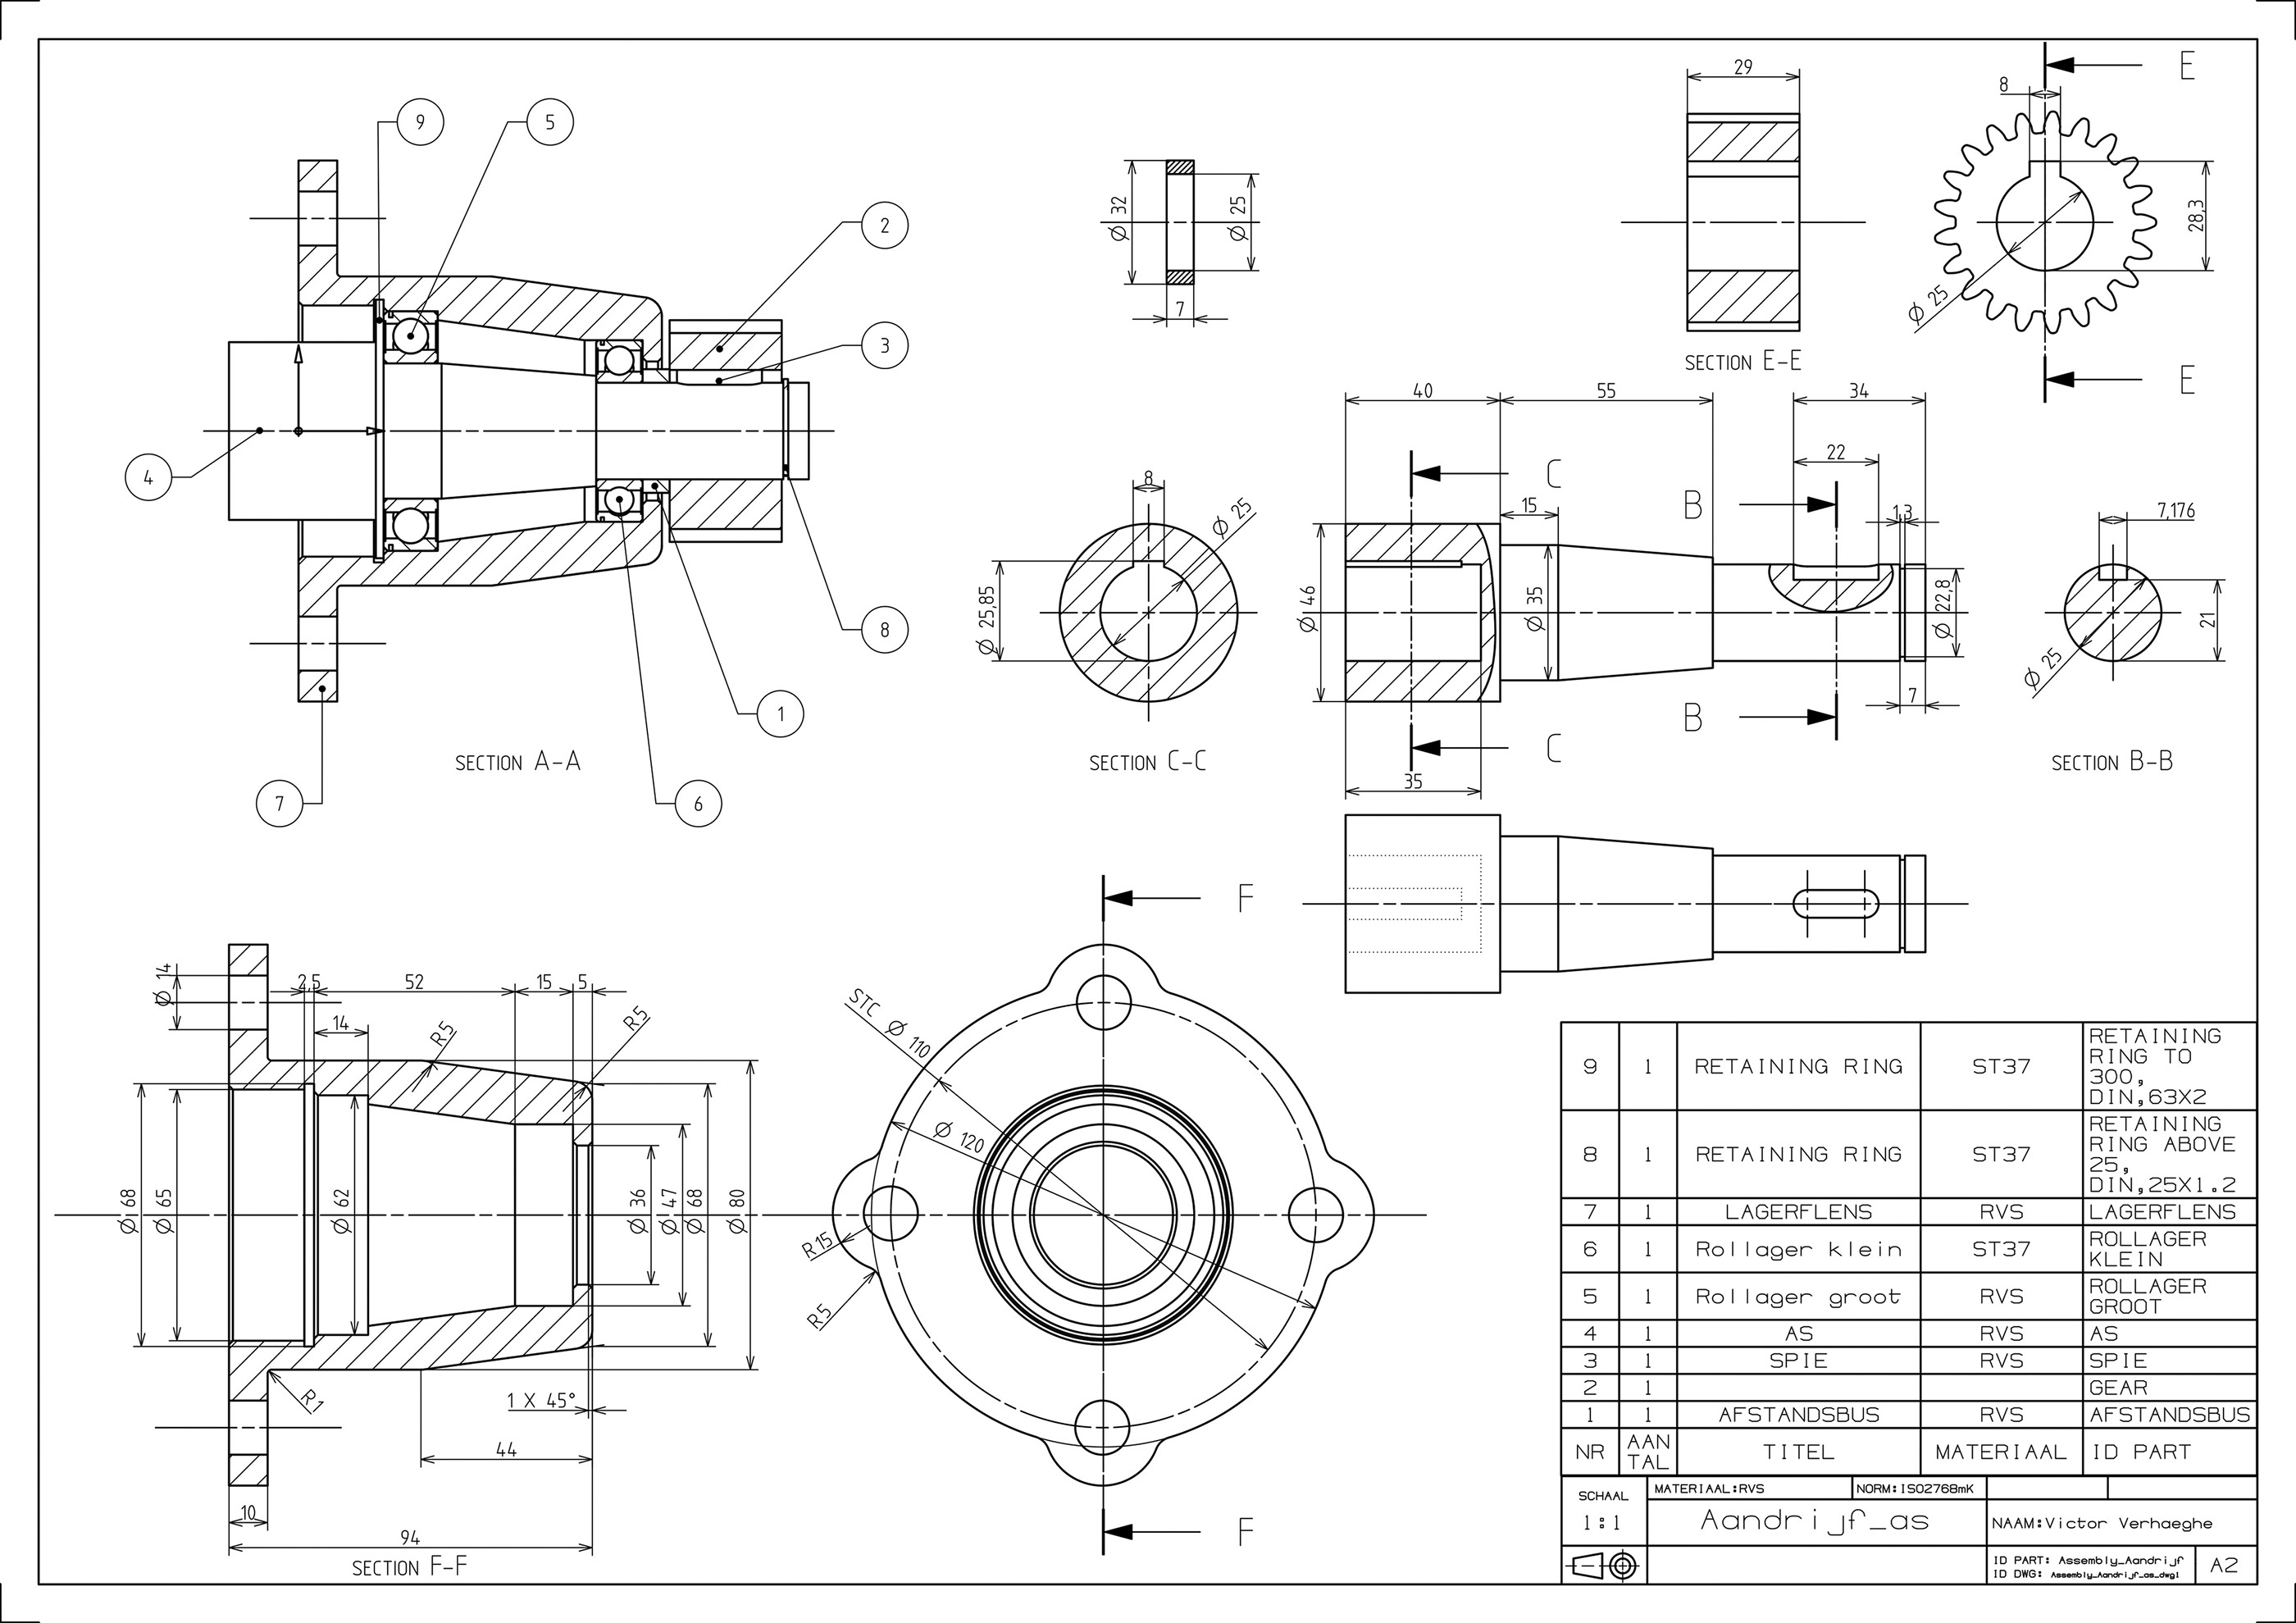 Technical Drawings on Behance